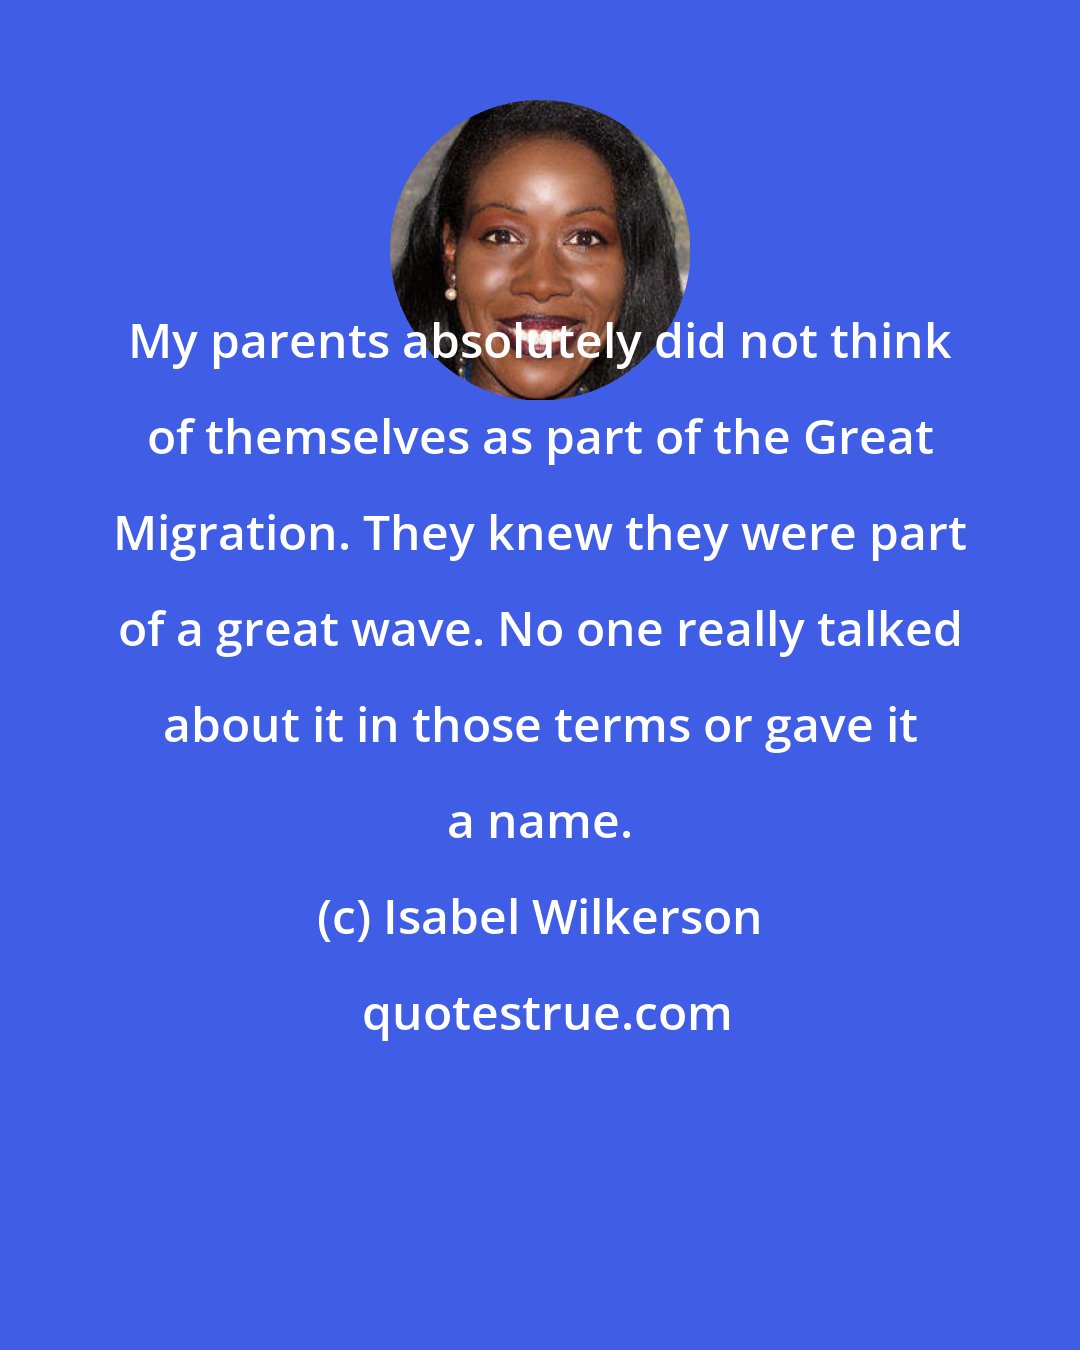 Isabel Wilkerson: My parents absolutely did not think of themselves as part of the Great Migration. They knew they were part of a great wave. No one really talked about it in those terms or gave it a name.